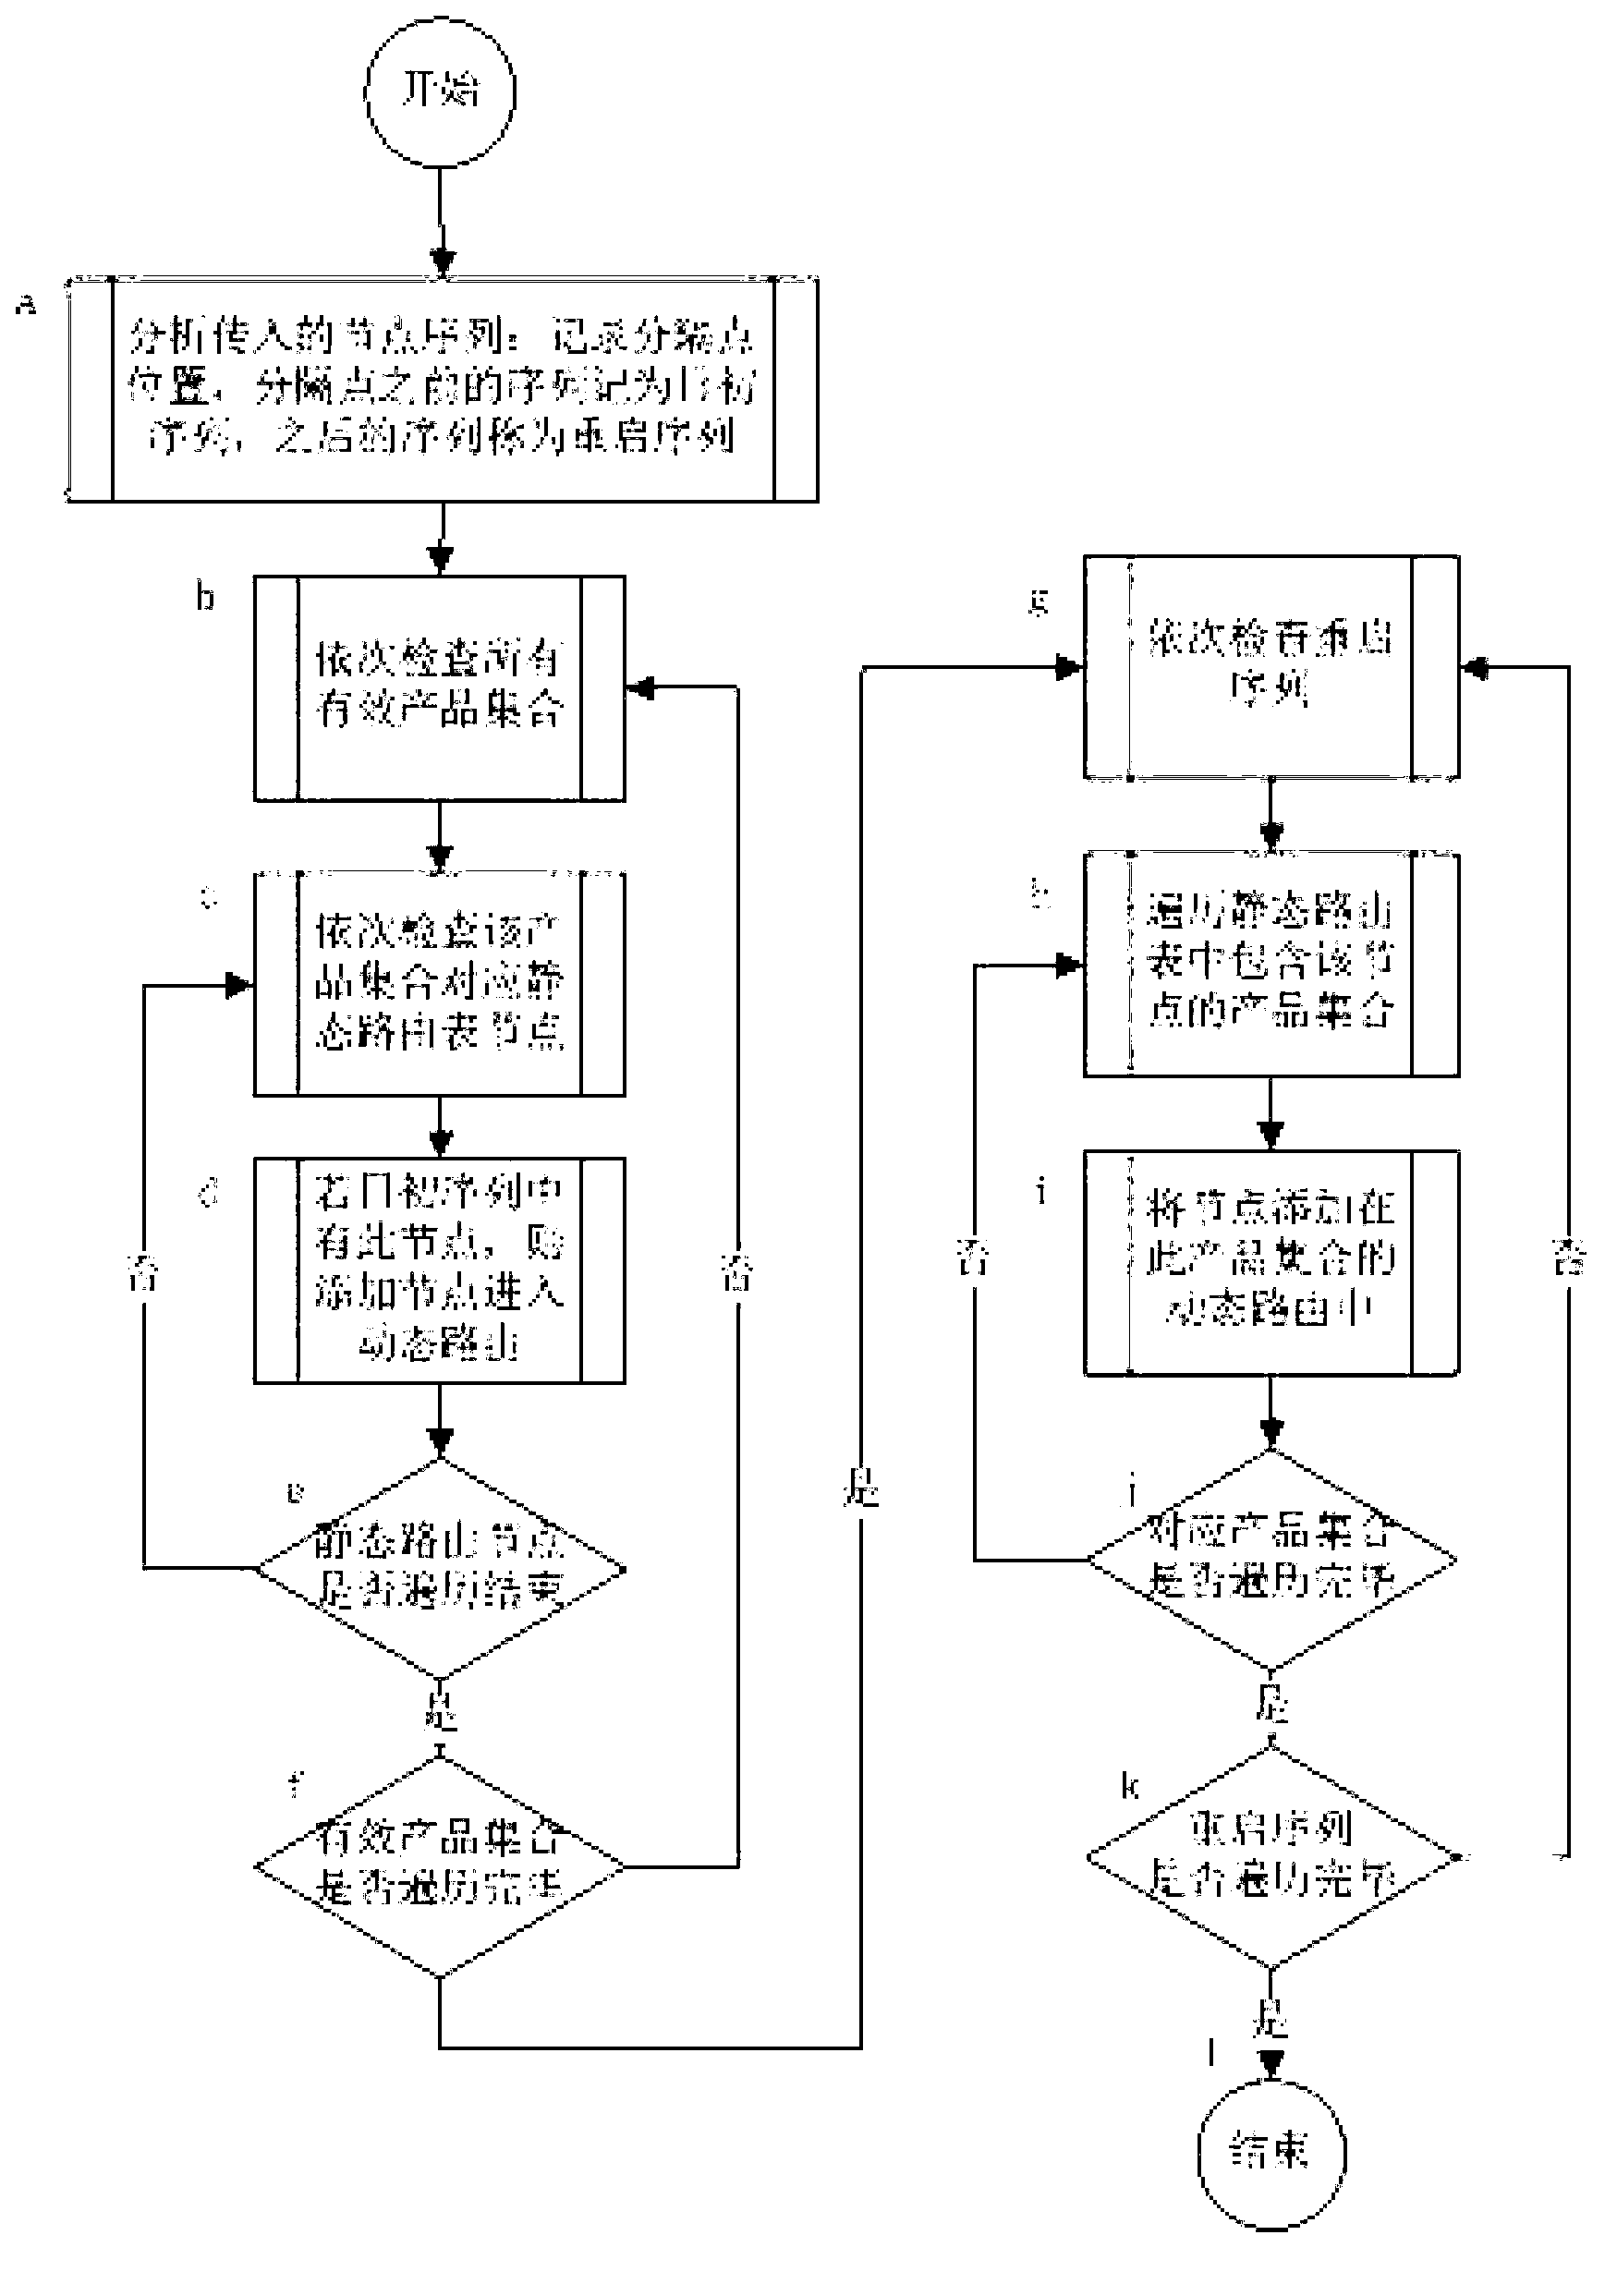 Method for managing and switching high availability multi-machine backup routing table